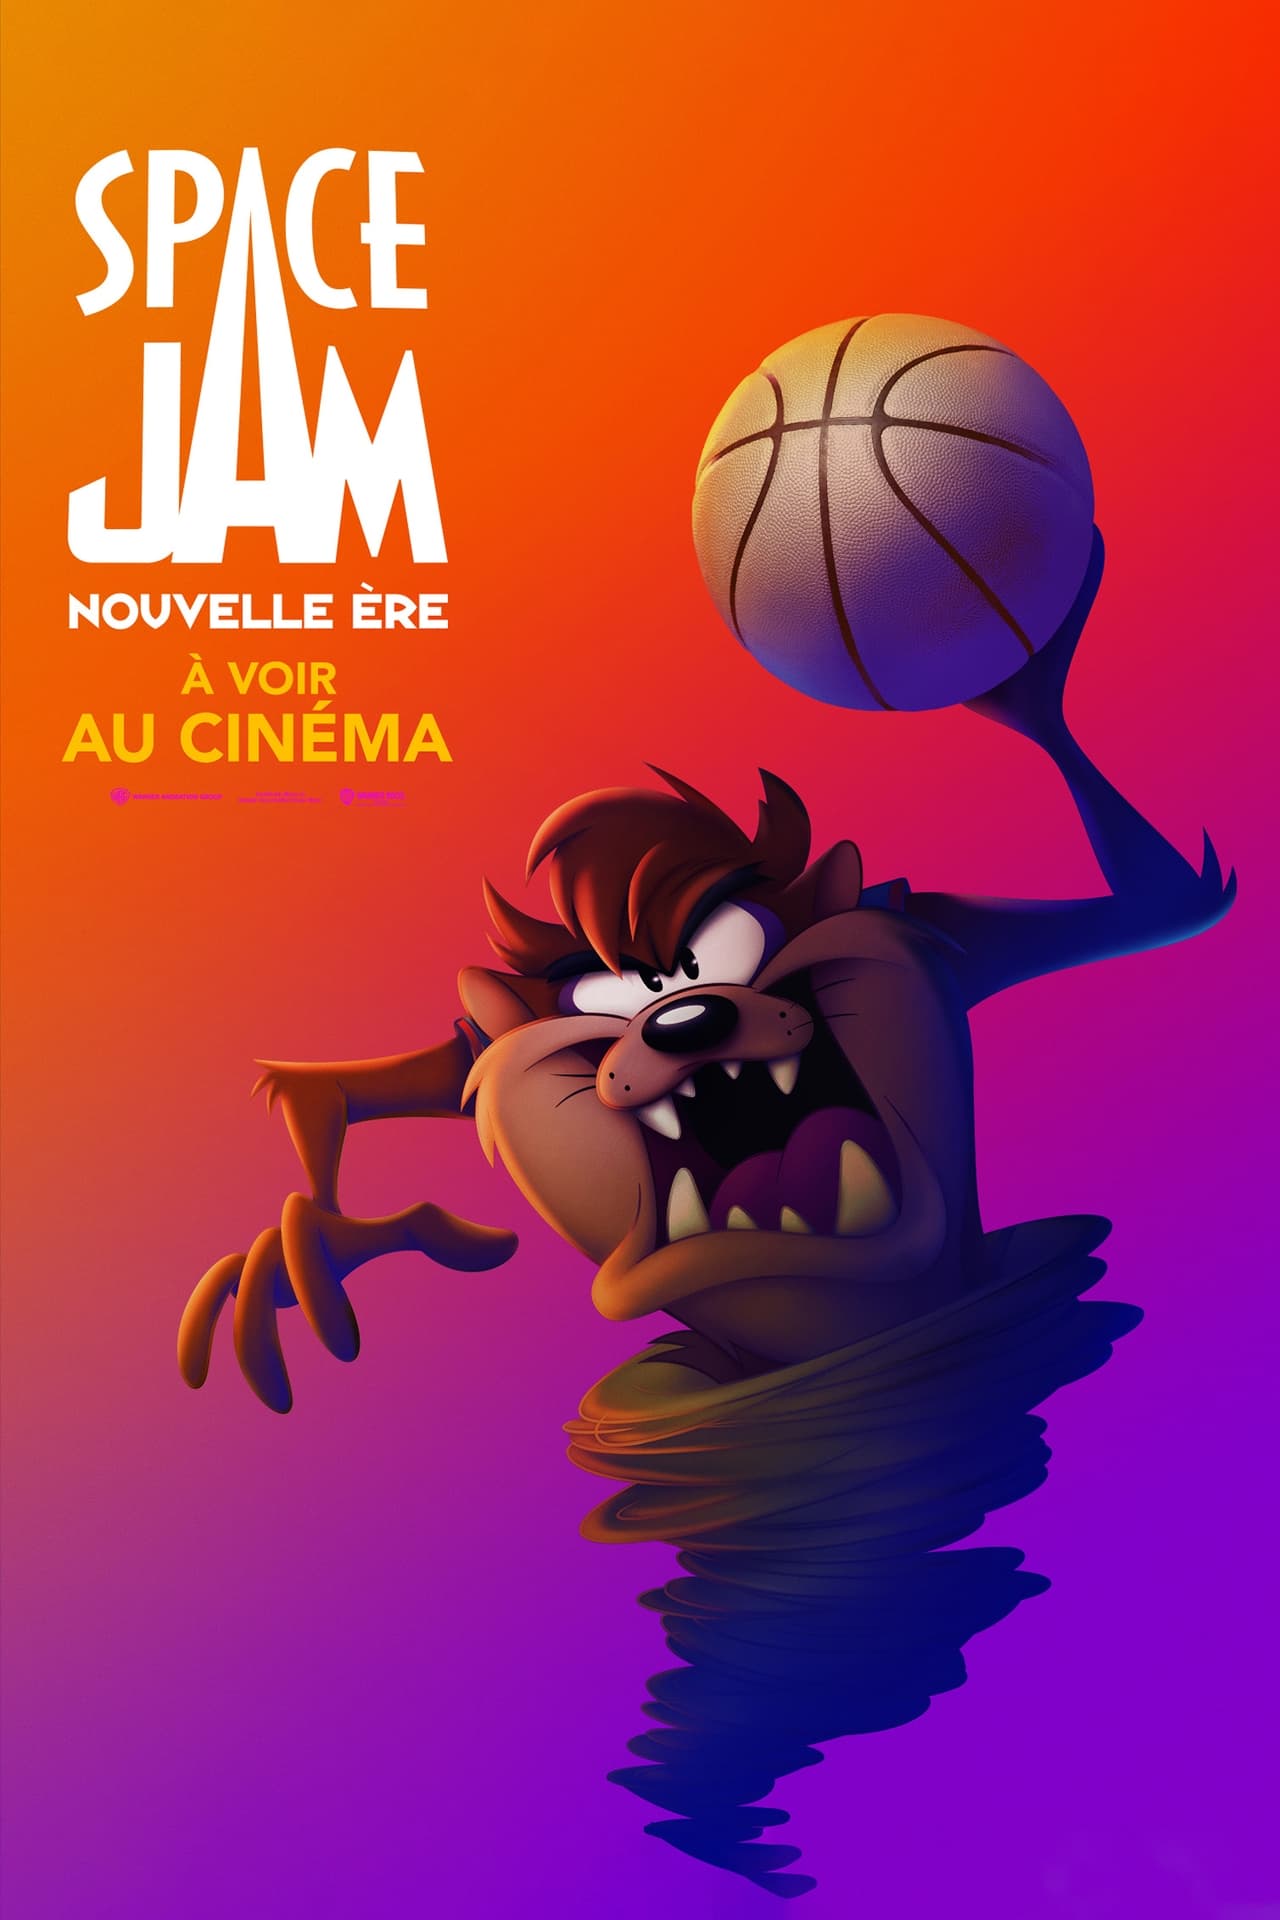 Space Jam: A New Legacy (2021) - ⭐7.5/10 - Mediainfo Parser | Powered